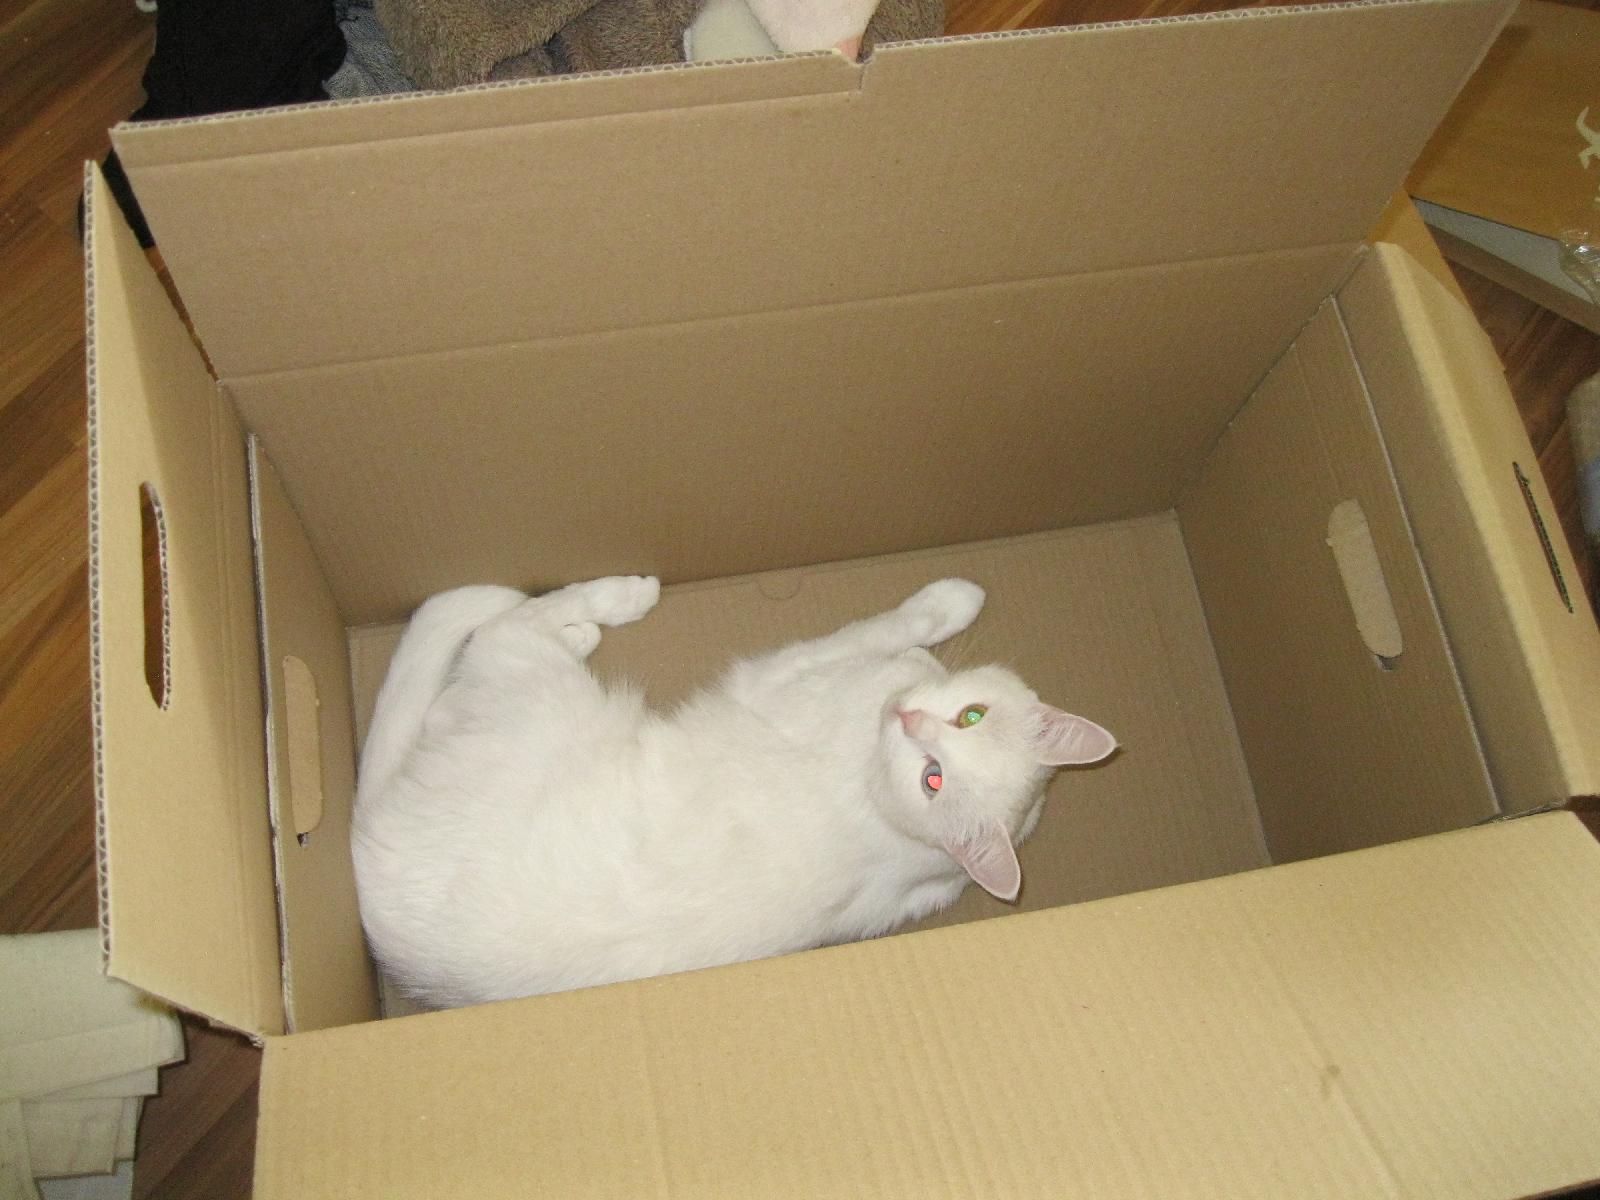 Moving Boxes are for Cats